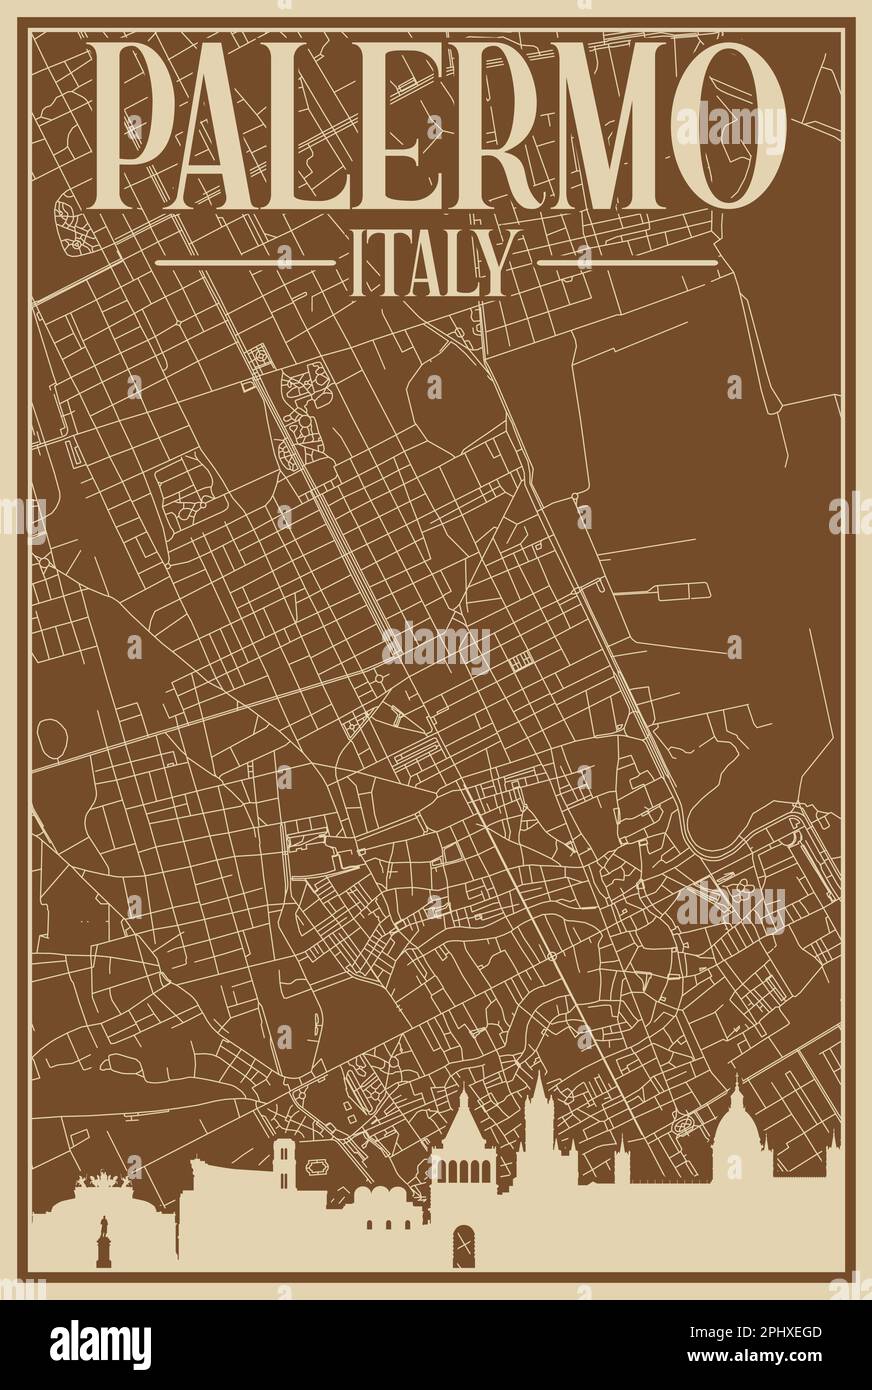 Road network poster of the downtown PALERMO, ITALY Stock Vector